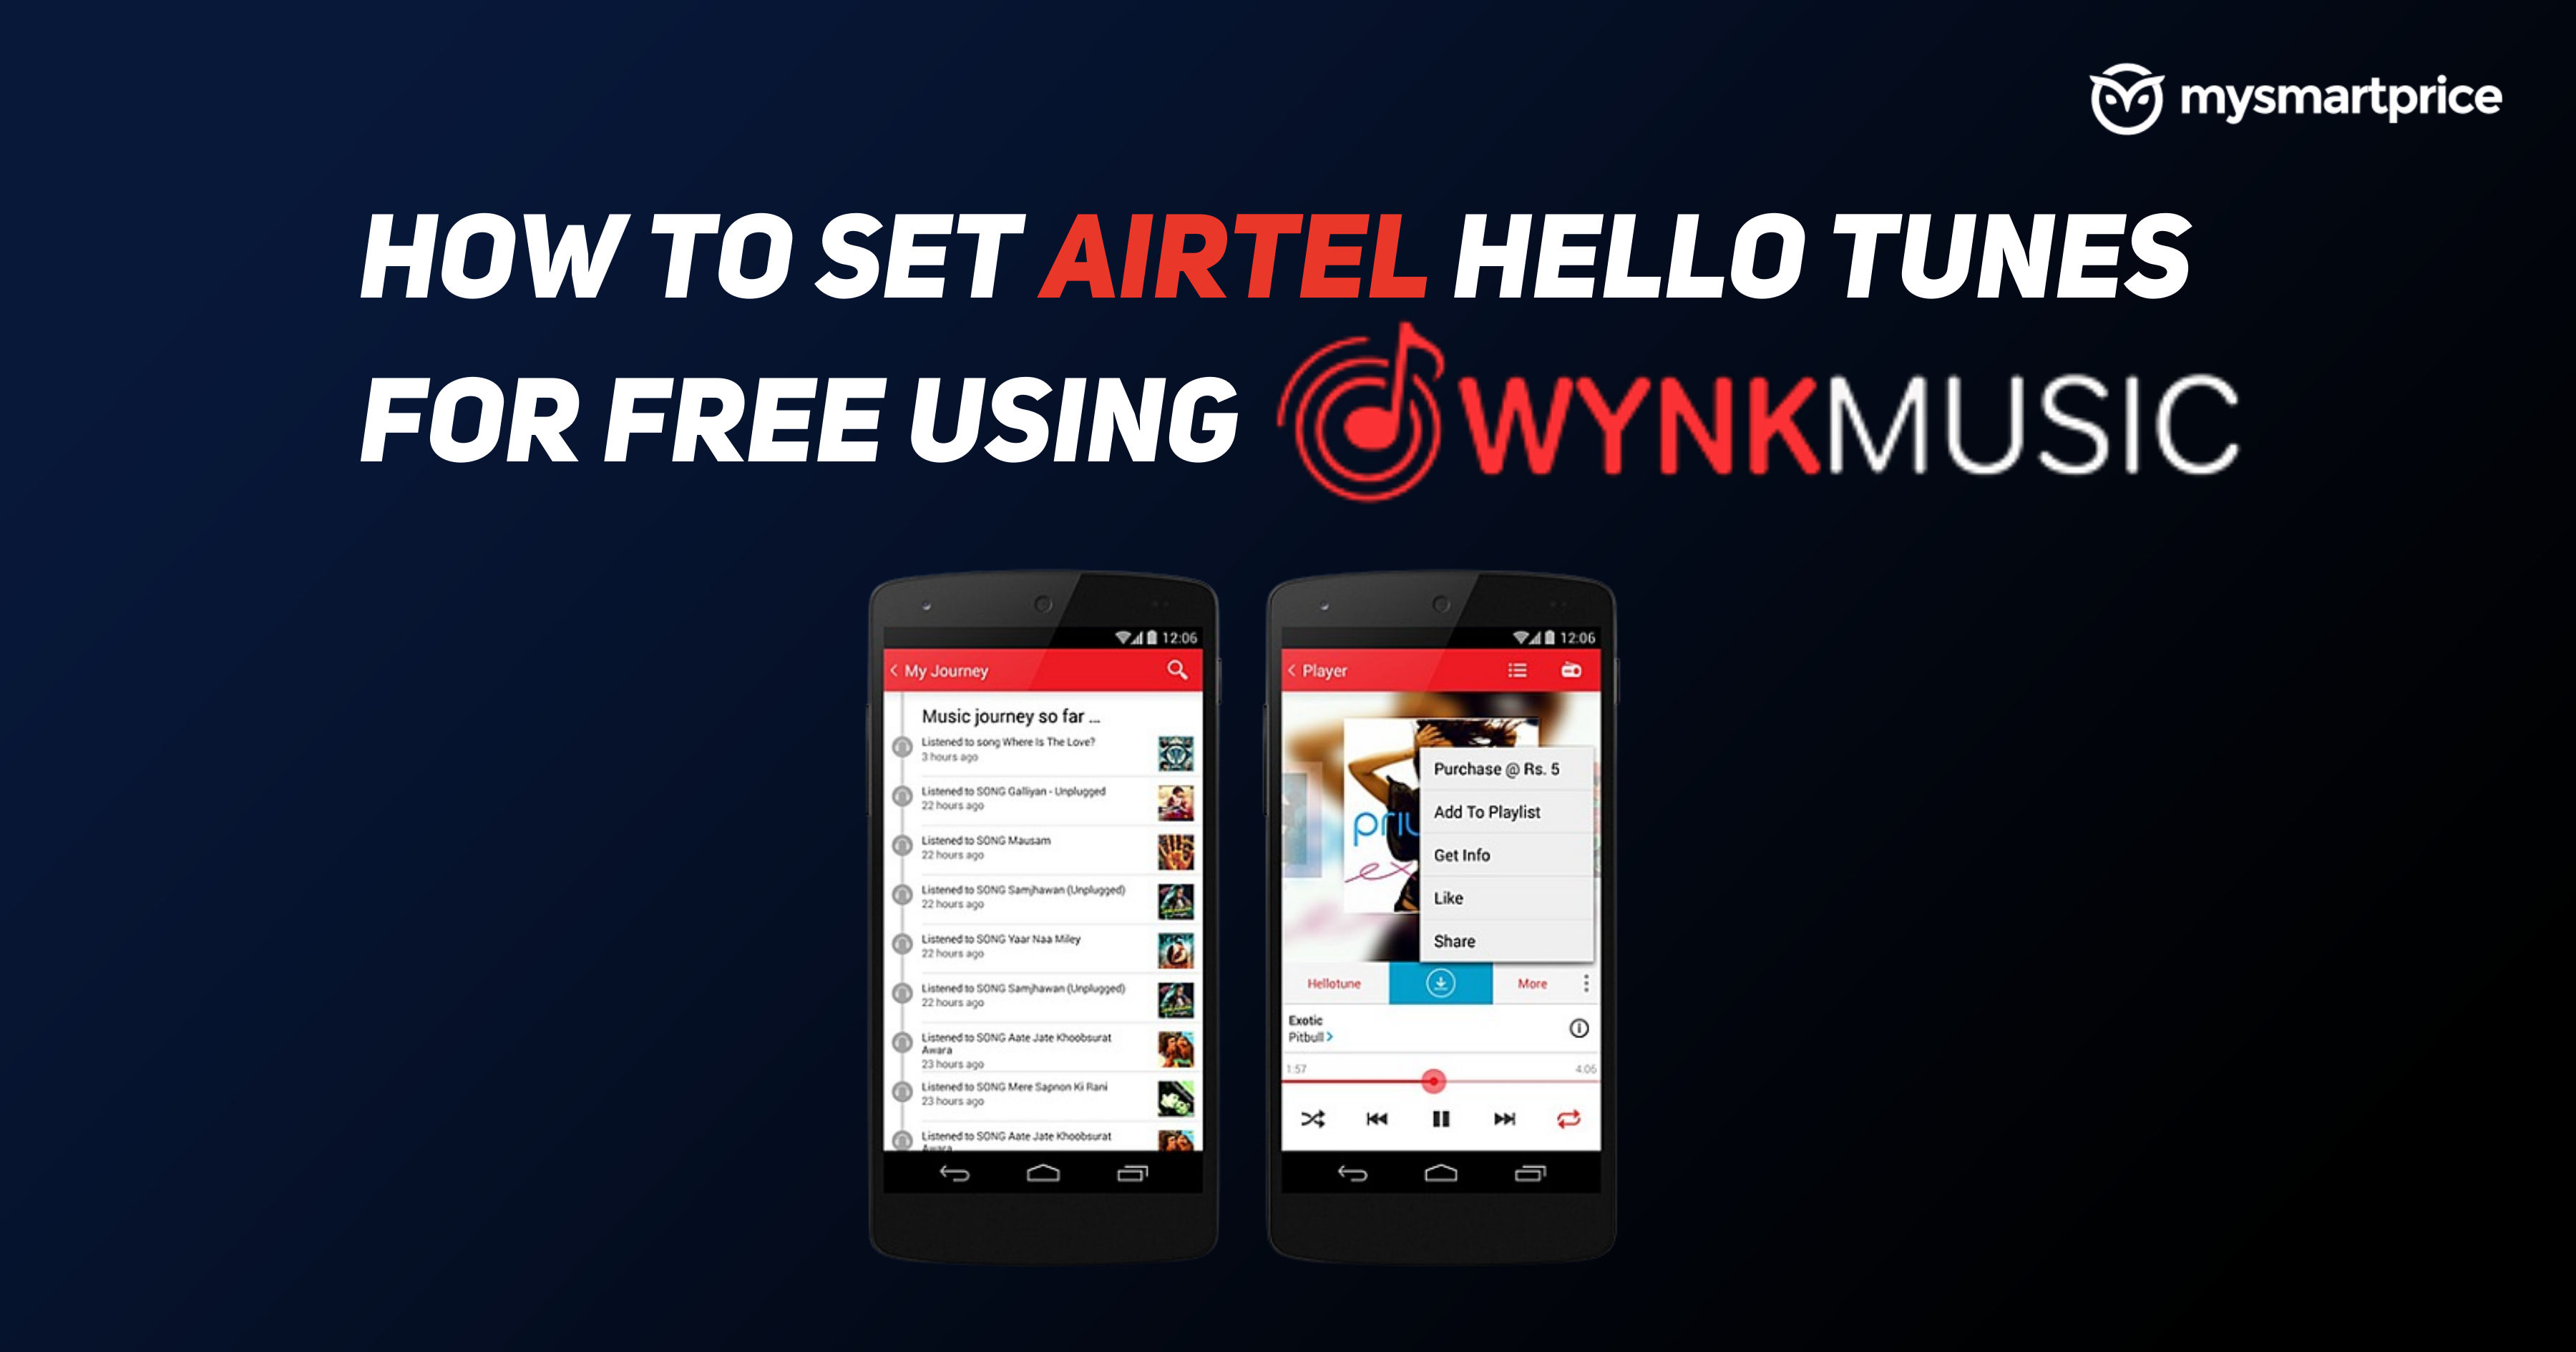 How to Set Airtel Hello Tunes for Free Using